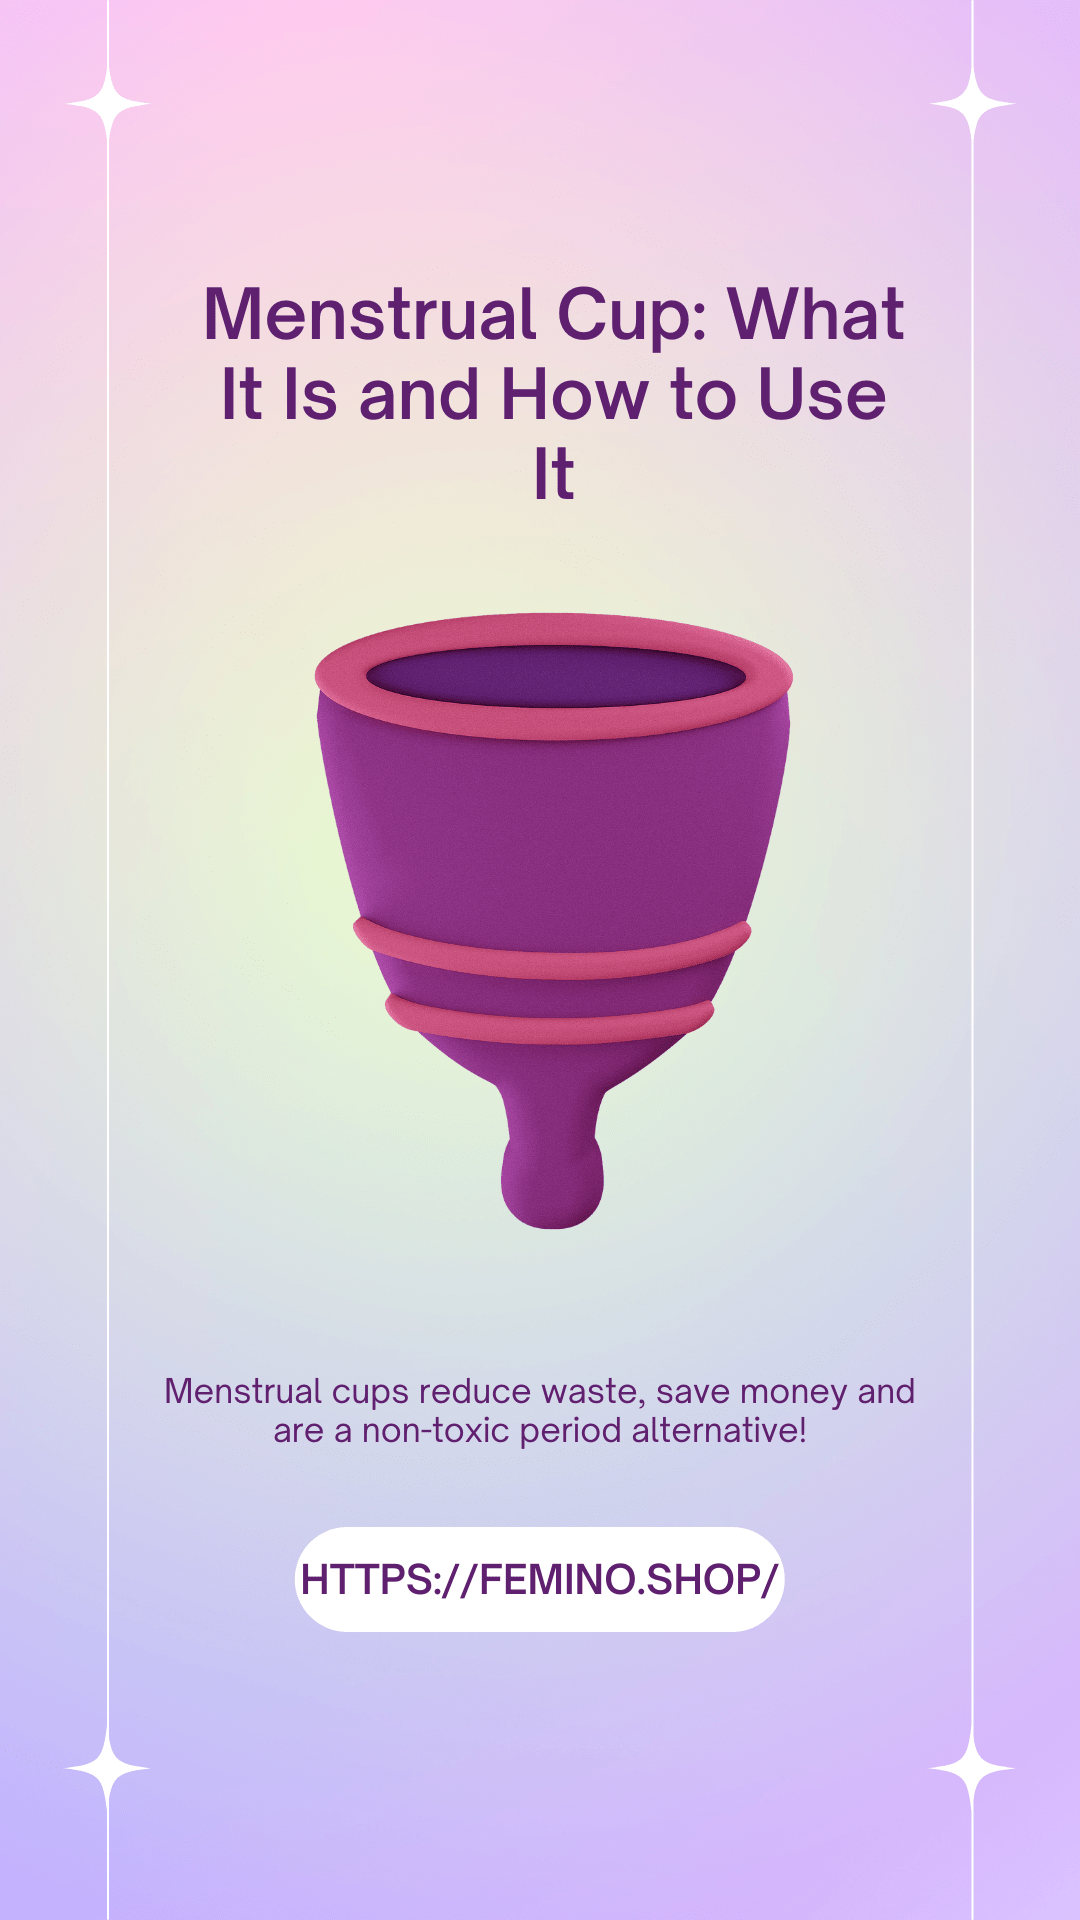 Menstrual Cup: What It Is and How to Use It